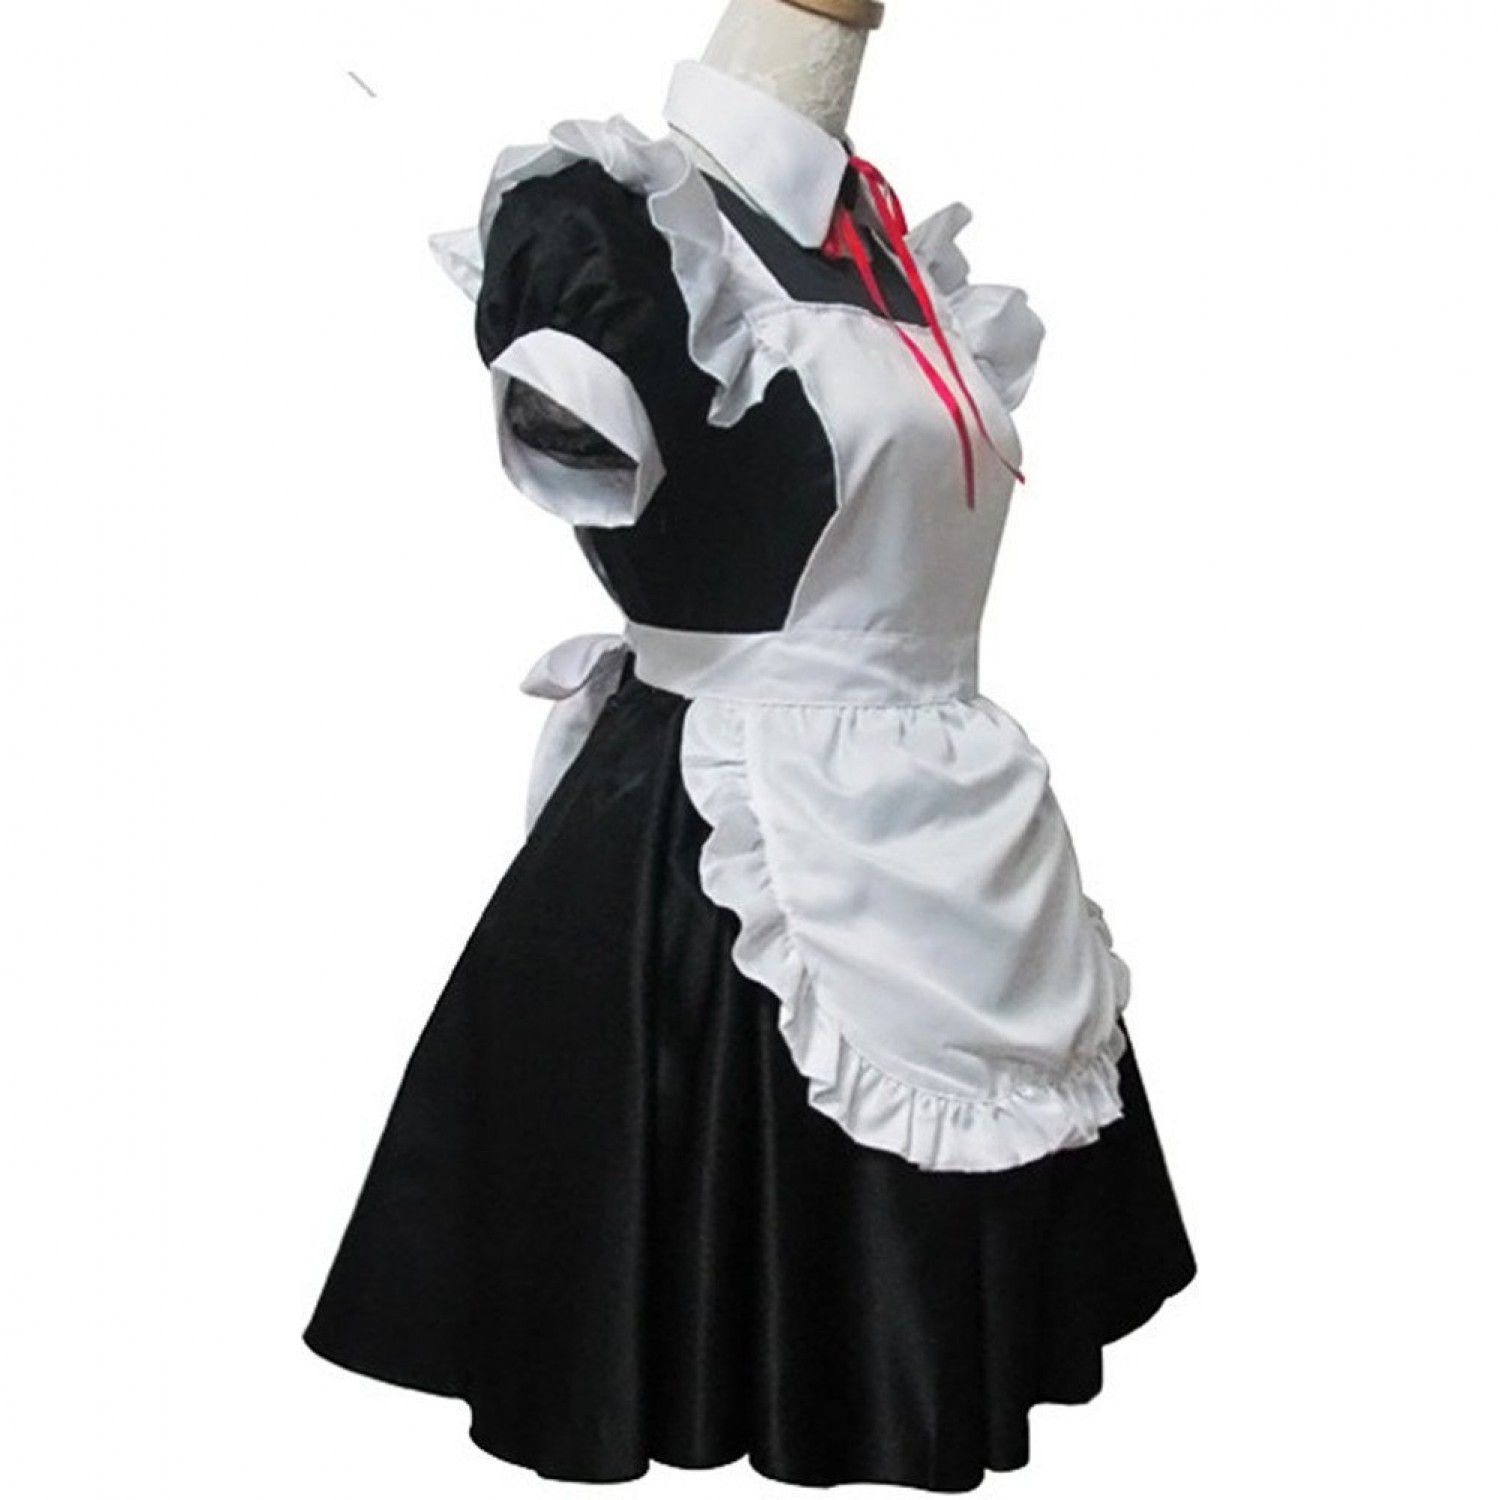 Women's Anime Cosplay Costume French Apron Maid Fancy ...